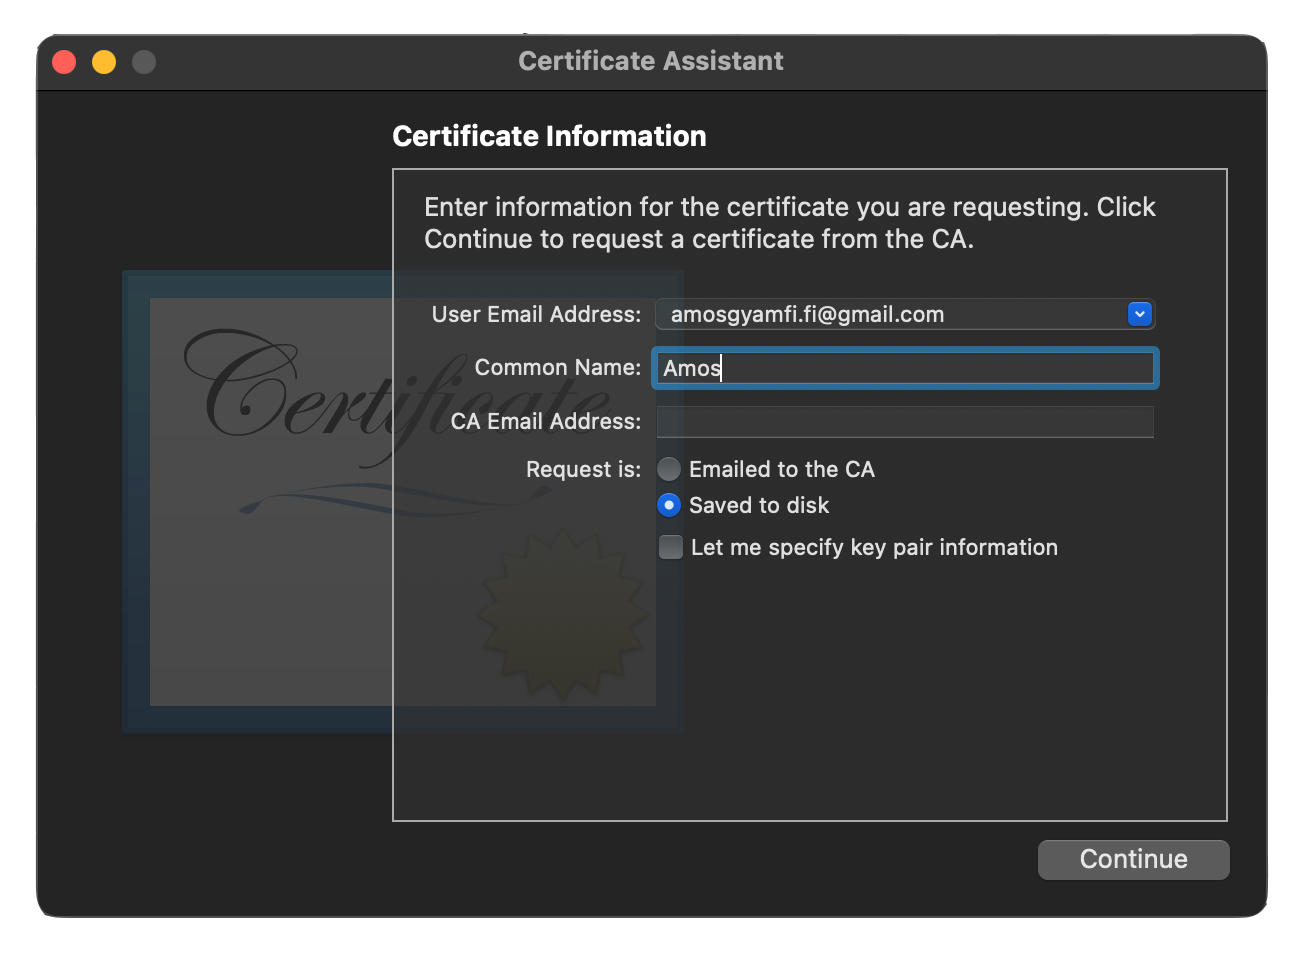 Name your certificate